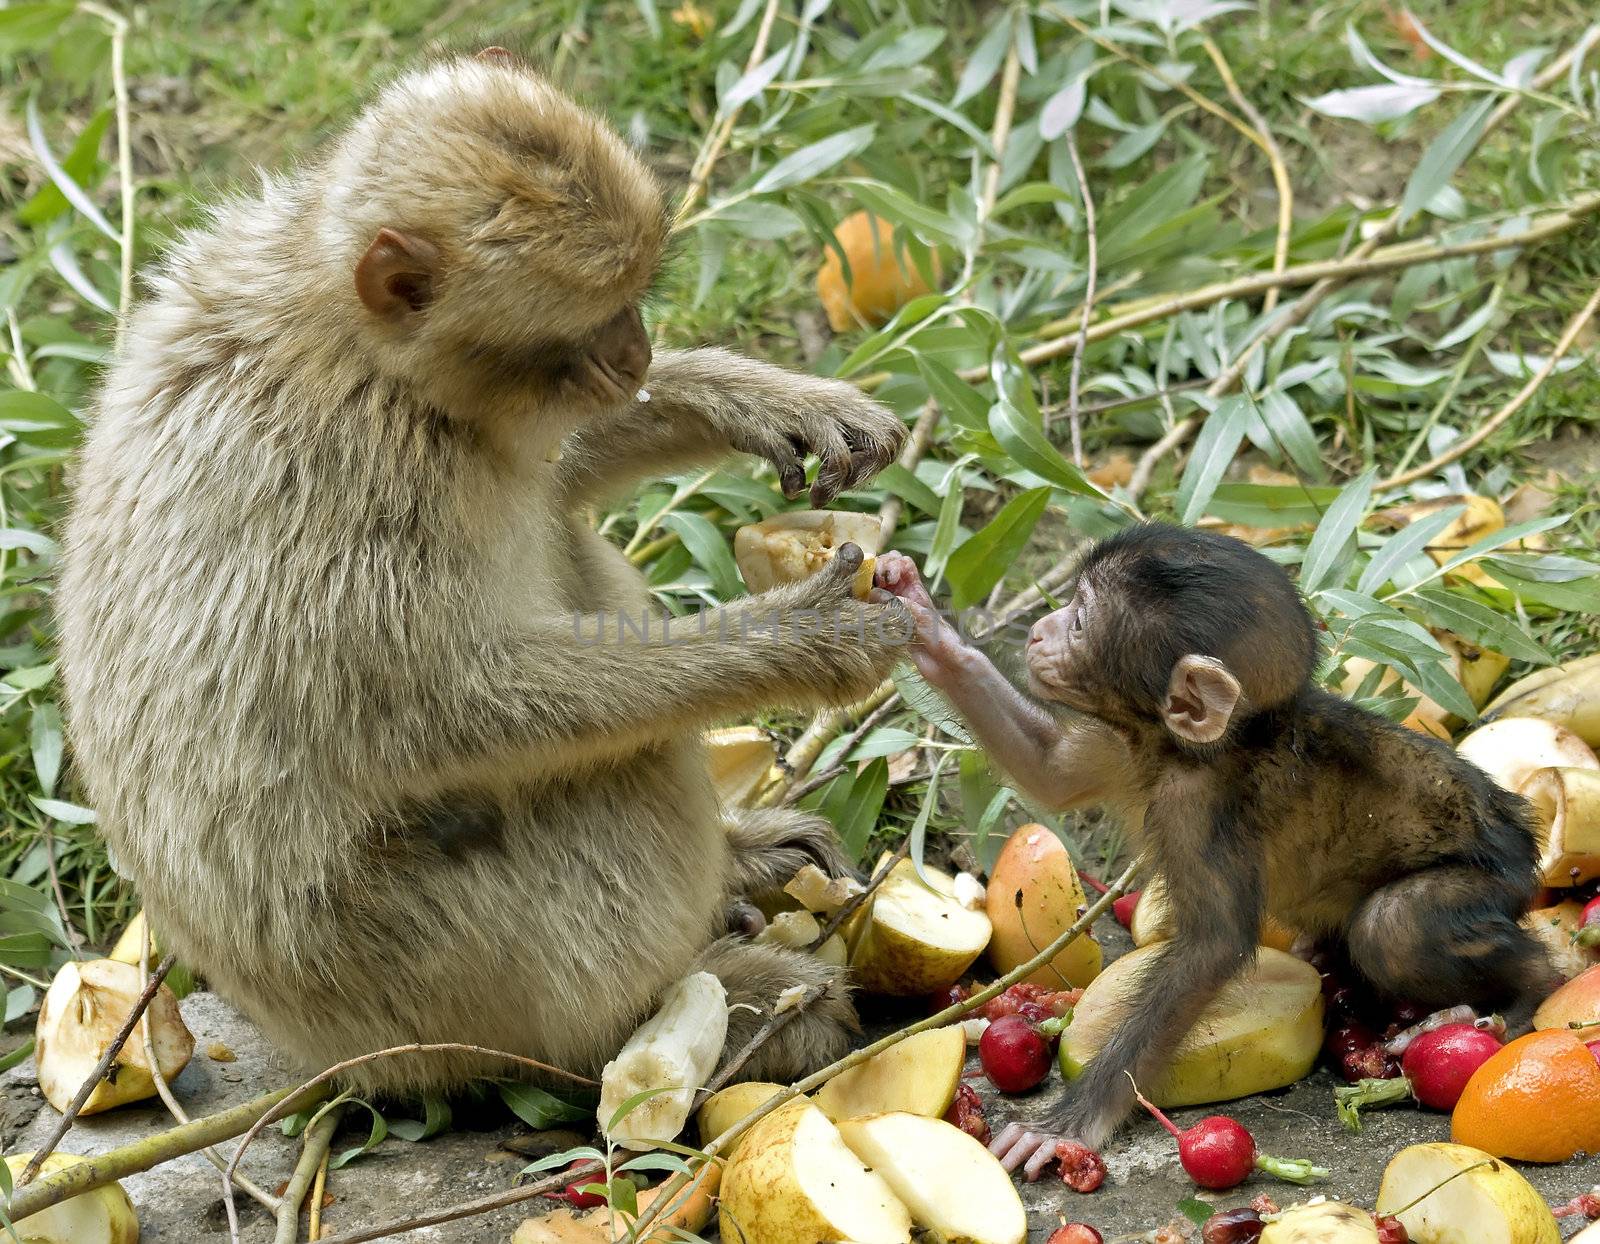 A mother monkey giving food to baby